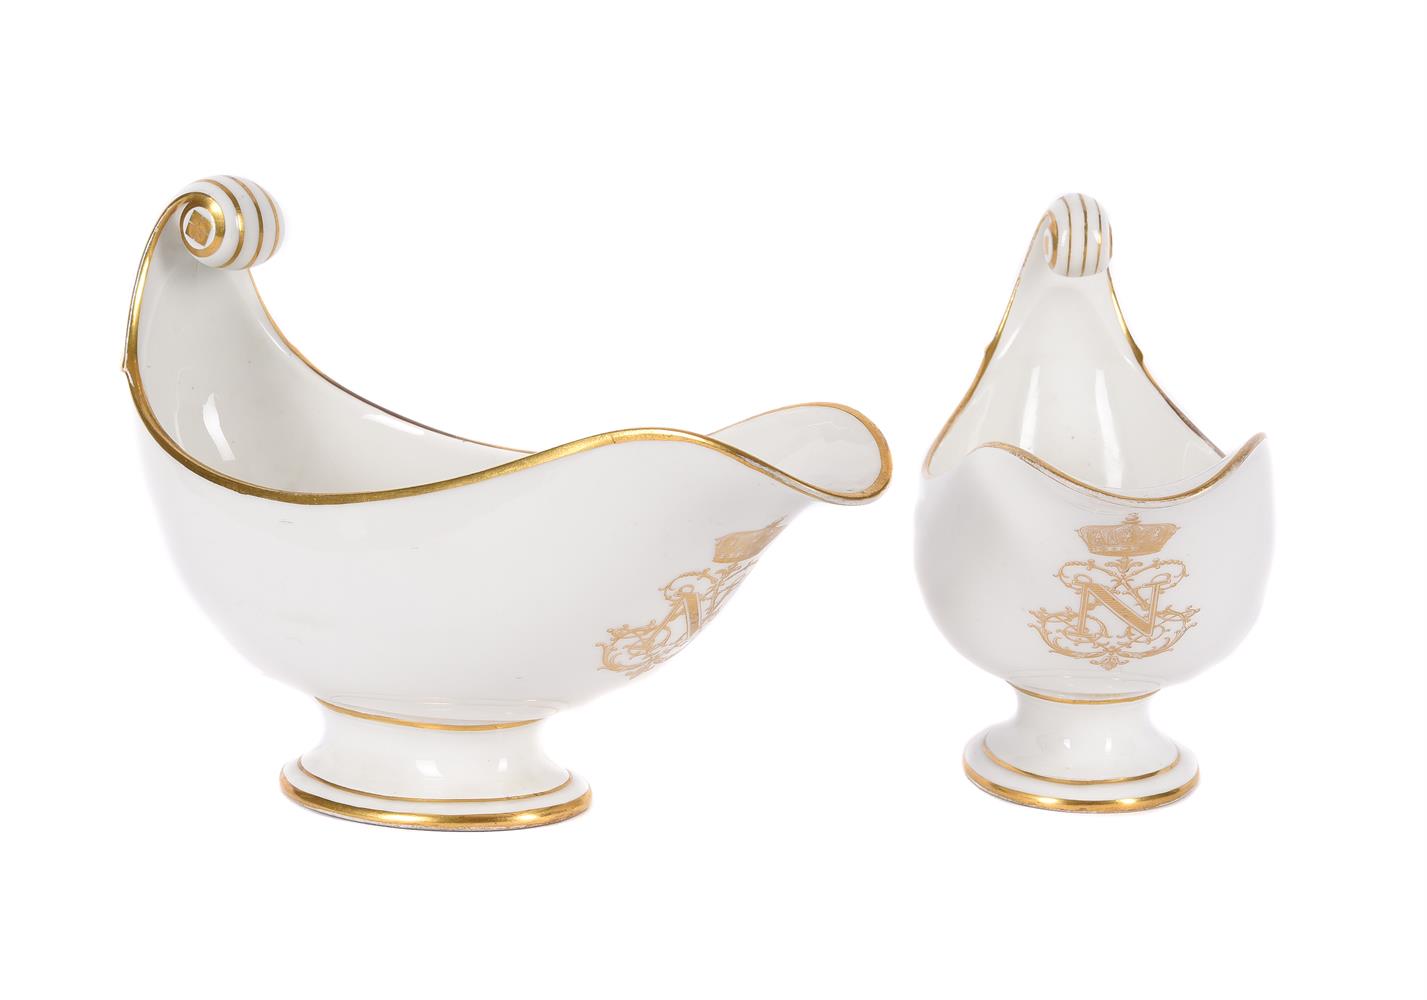 TWO SIMILAR SEVRES WHITE PORCELAIN AND GILT ETRUSCAN-SHAPE SAUCE BOATS